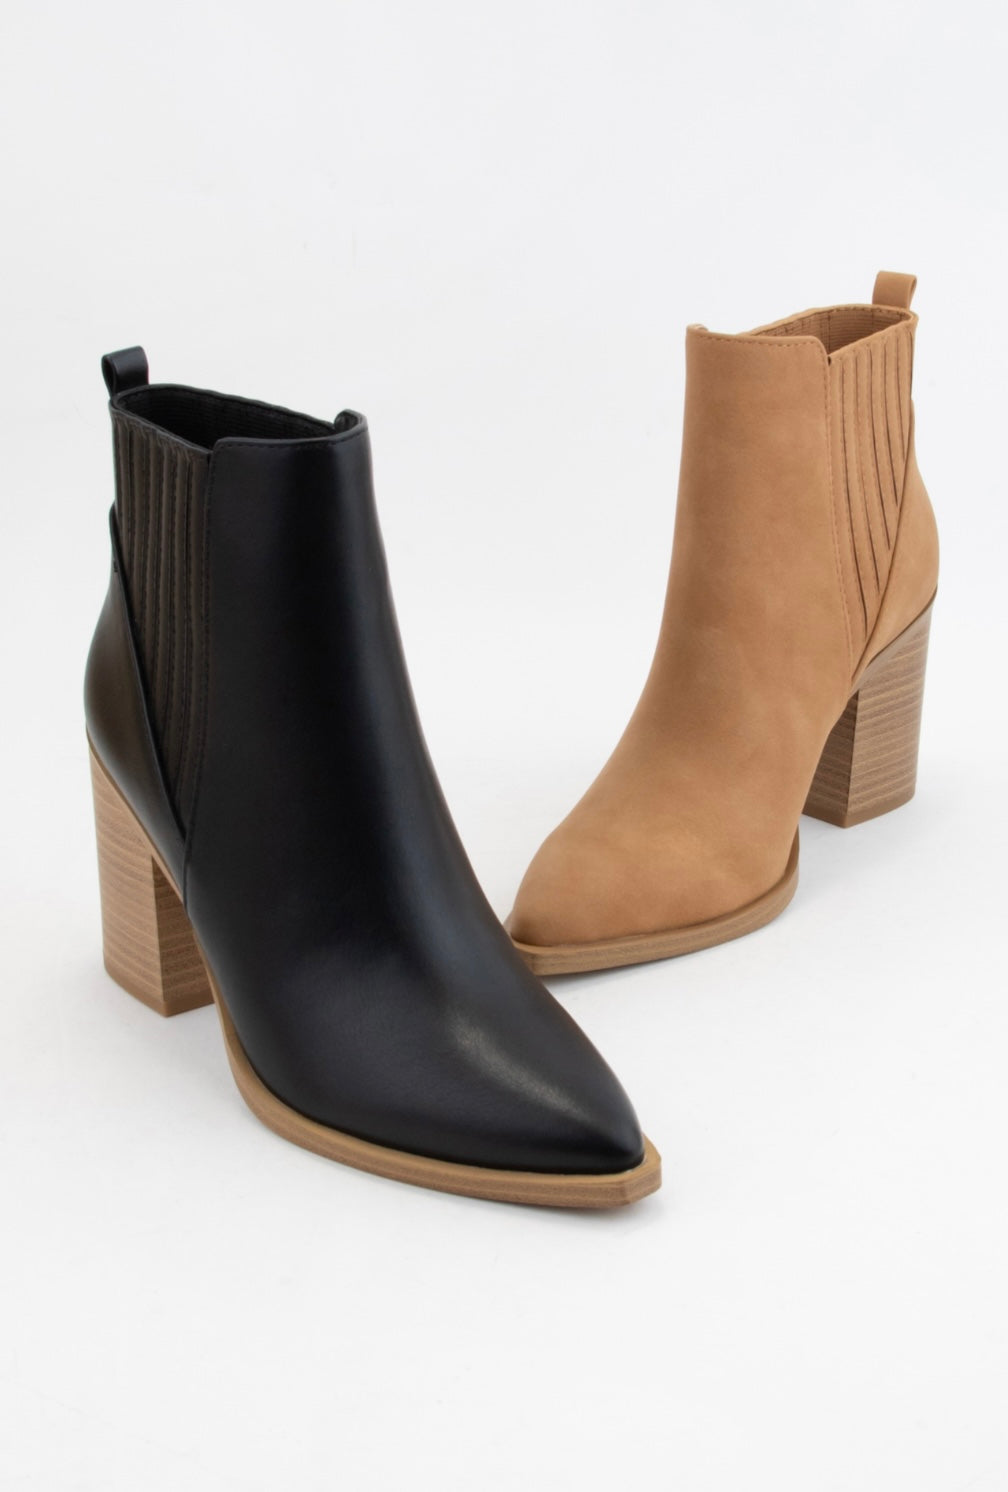 Pleated Ankle Booties (color options) - Spicy Chic Boutique